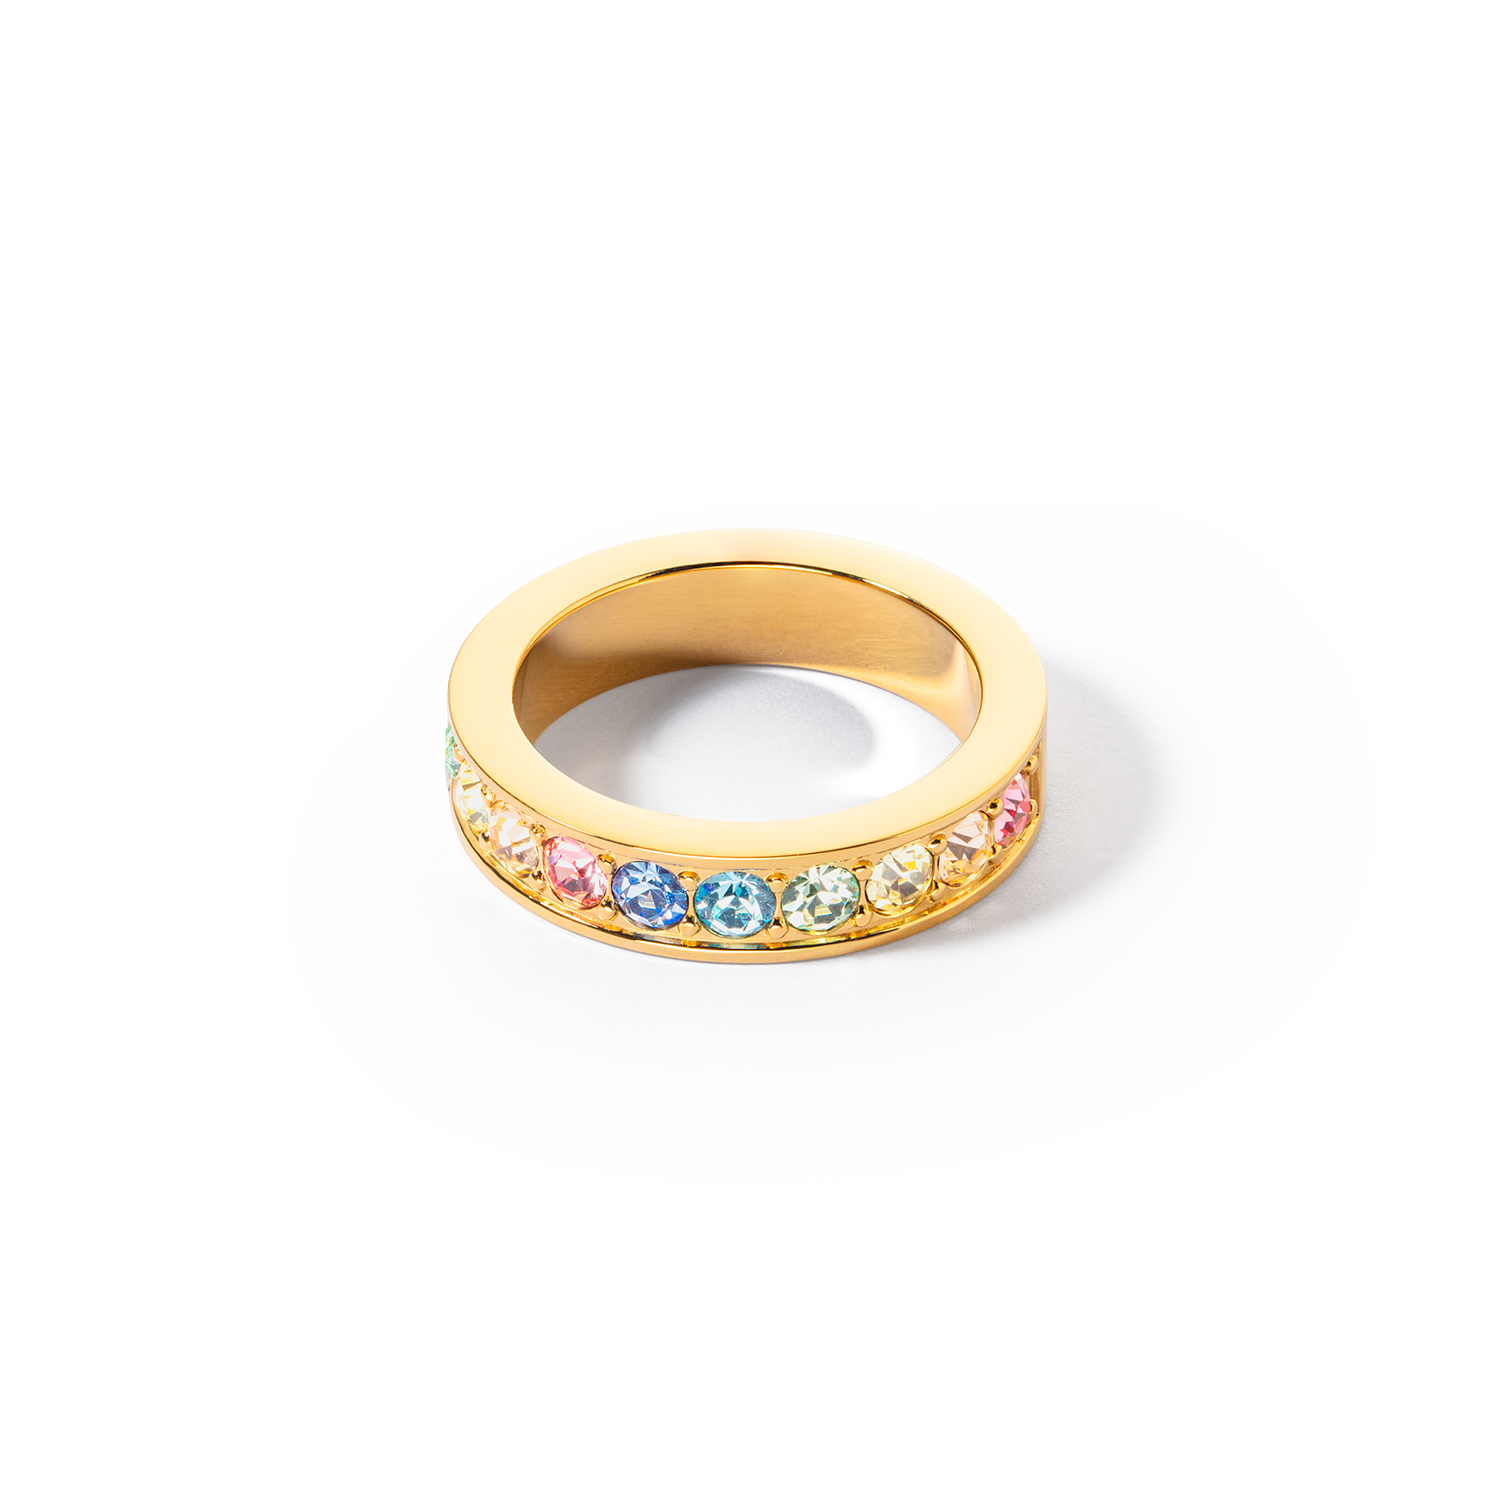 Ring stainless steel & crystals gold multi pastel